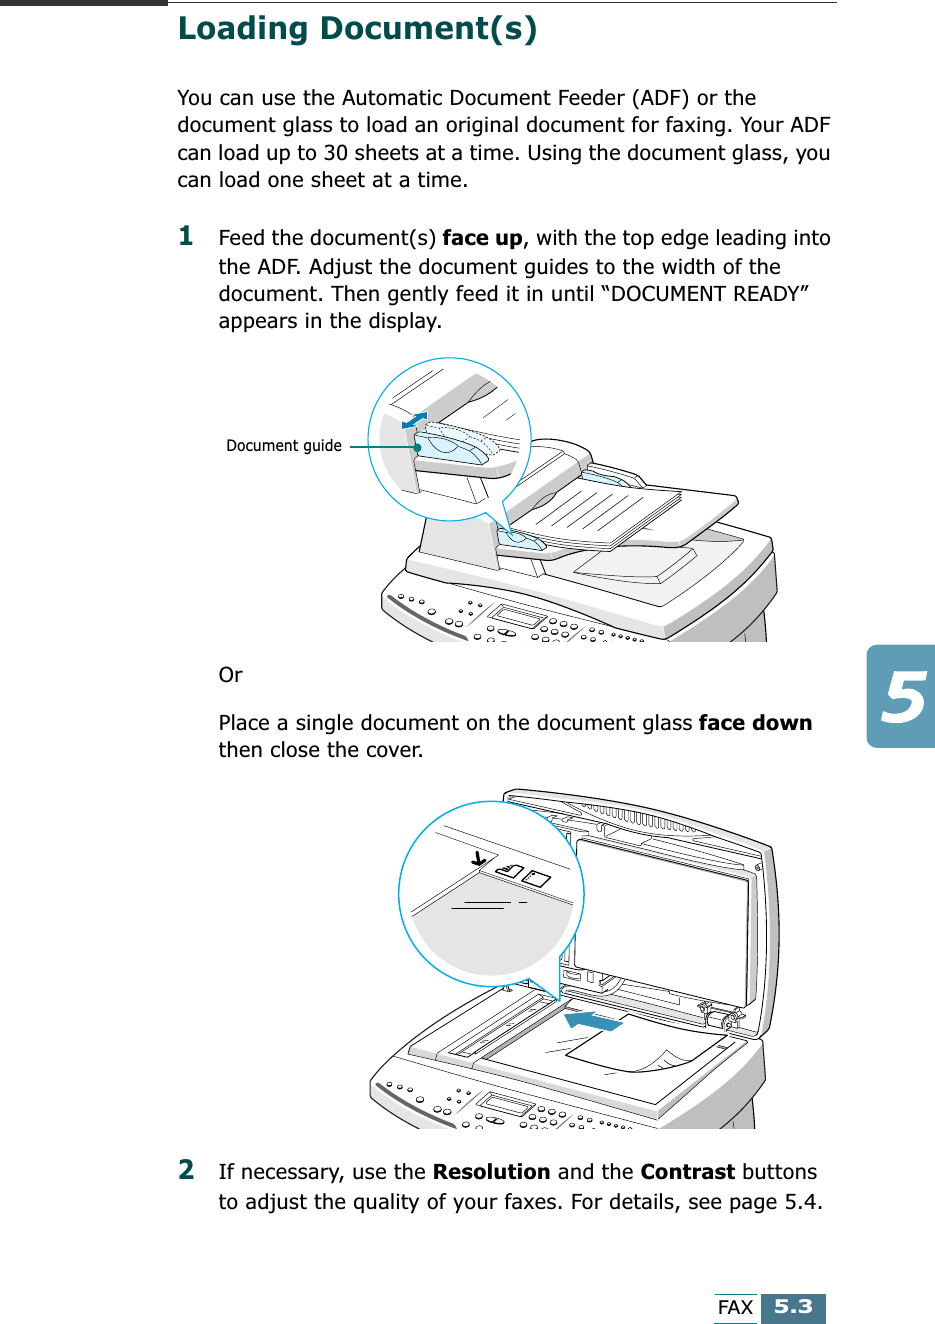  5.3 FAX Loading Document(s)  You can use the Automatic Document Feeder (ADF) or the document glass to load an original document for faxing. Your ADF can load up to 30 sheets at a time. Using the document glass, you can load one sheet at a time.  1 Feed the document(s)  face up , with the top edge leading into the ADF. Adjust the document guides to the width of the document. Then gently feed it in until “DOCUMENT READY” appears in the display.Or Place a single document on the document glass  face down  then close the cover. 2 If necessary, use the  Resolution  and the  Contrast  buttons to adjust the quality of your faxes. For details, see page 5.4.Document guide